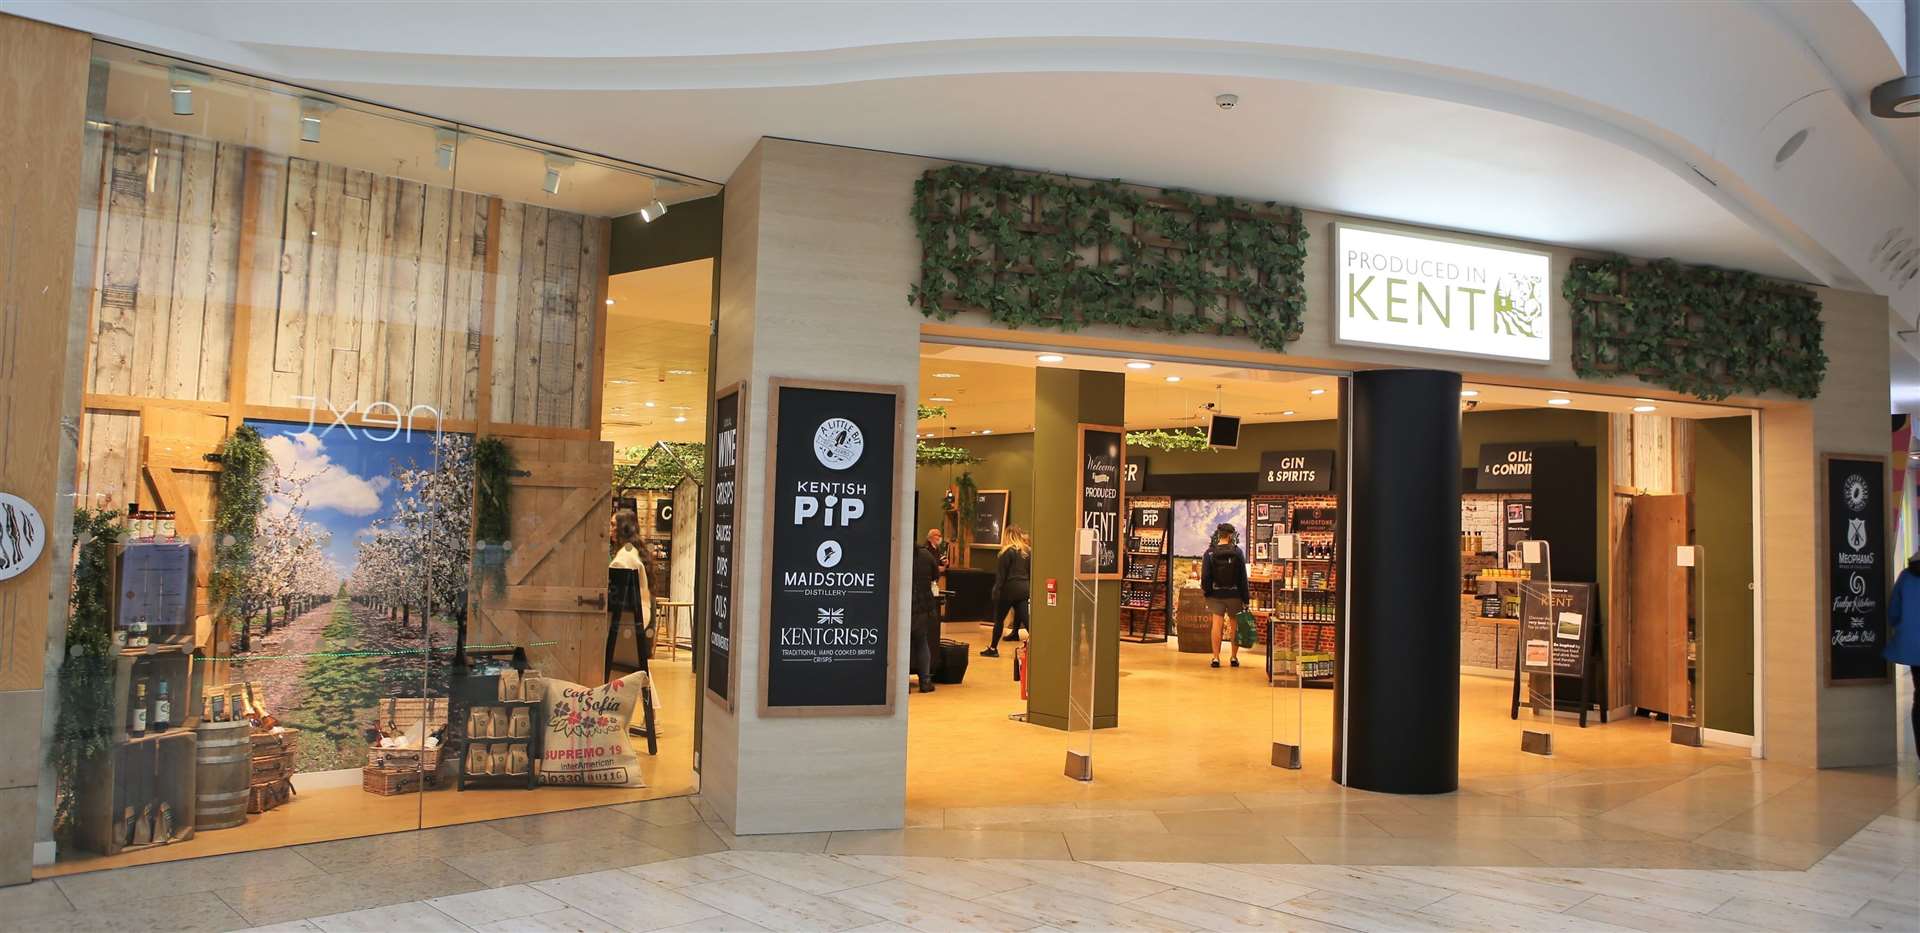 A new Produced in Kent shop has opened at Bluewater